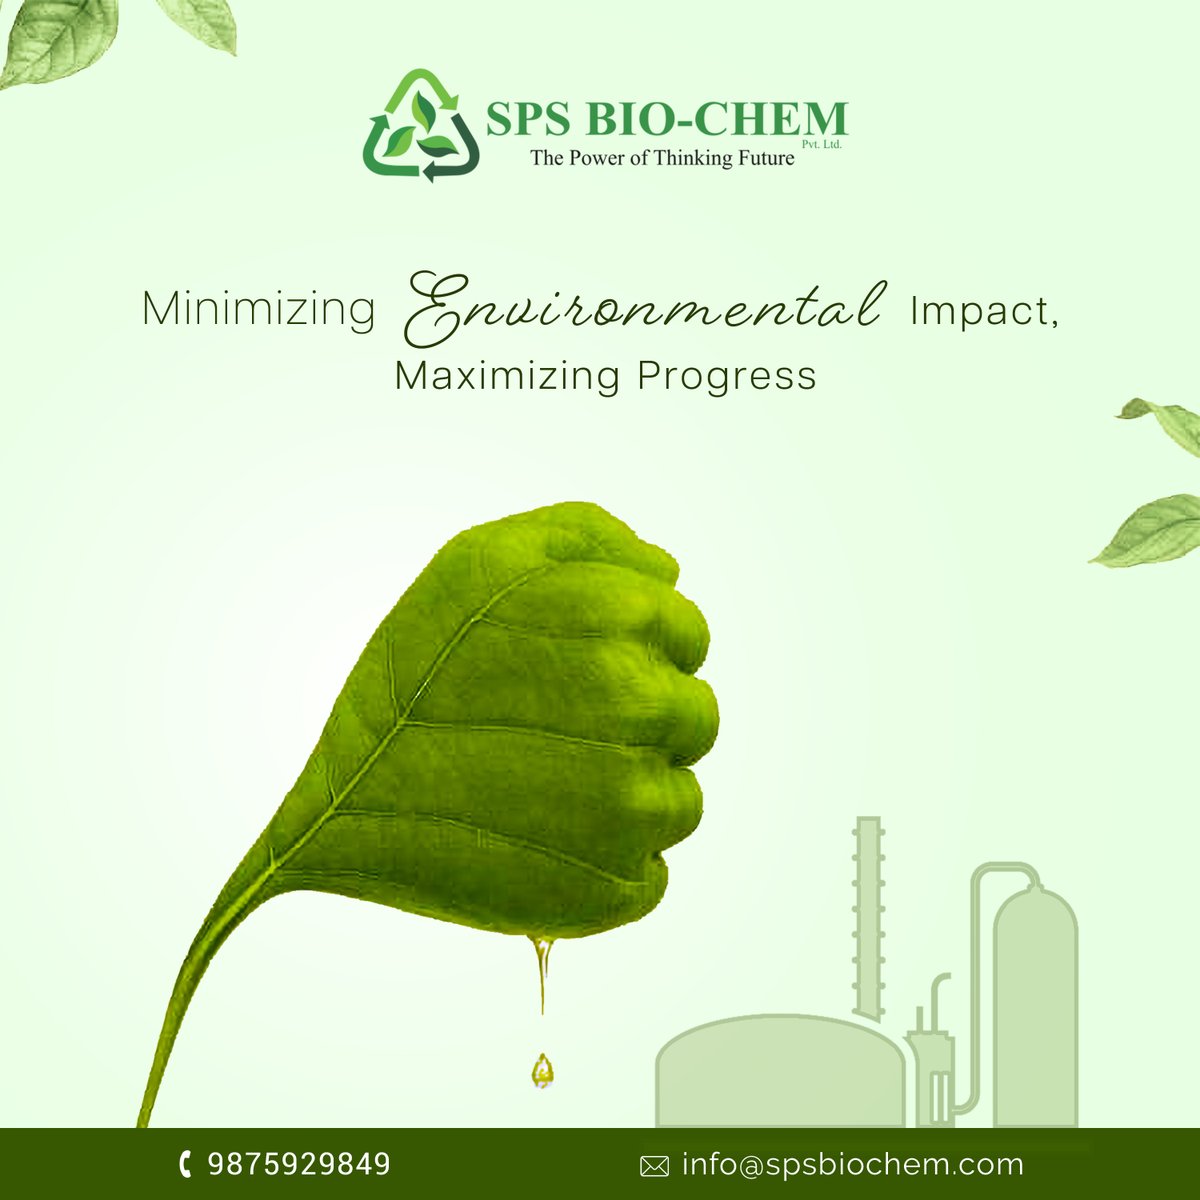 SPS Bio Chem's bio gas revolutionizes sustainability and fuels progress! Witness the power of eco-friendly innovation as we harness bio gas to minimize environmental impact while propelling progress to new heights. #environment #sustainability #ecoliving #biodegradable #biogas